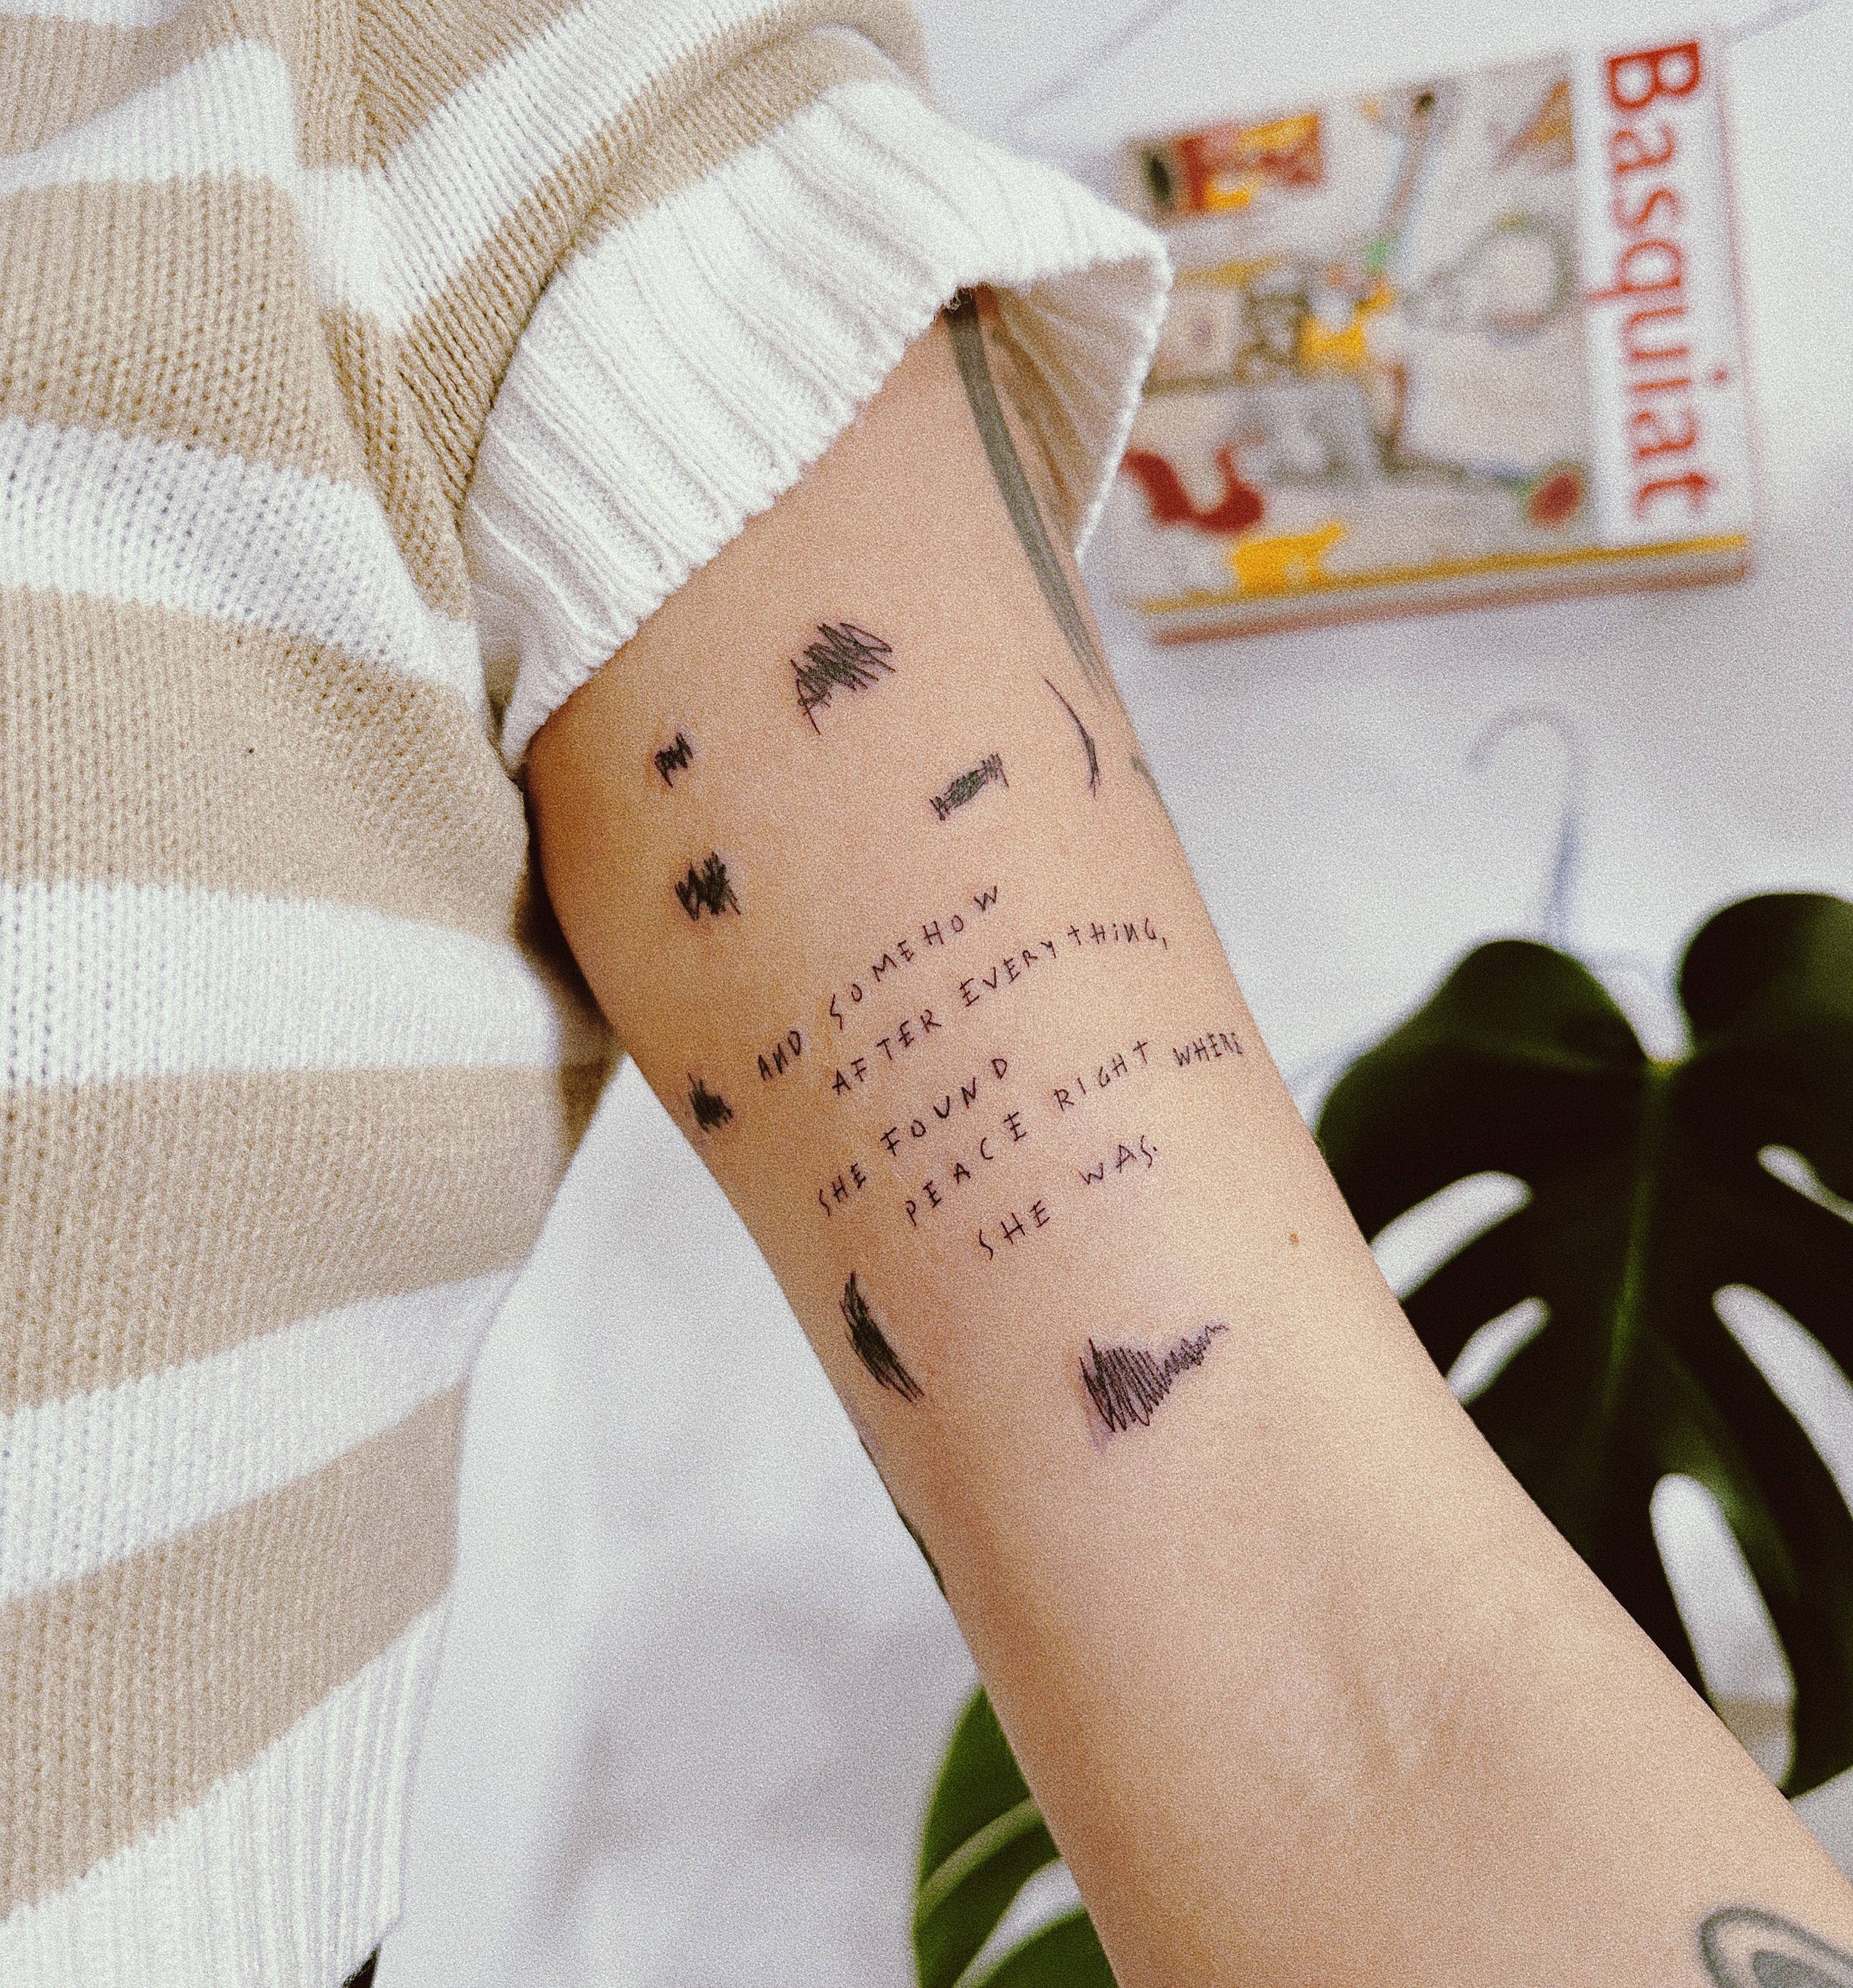 6 Ideas Of Anxiety Tattoos That Will Help You Cope